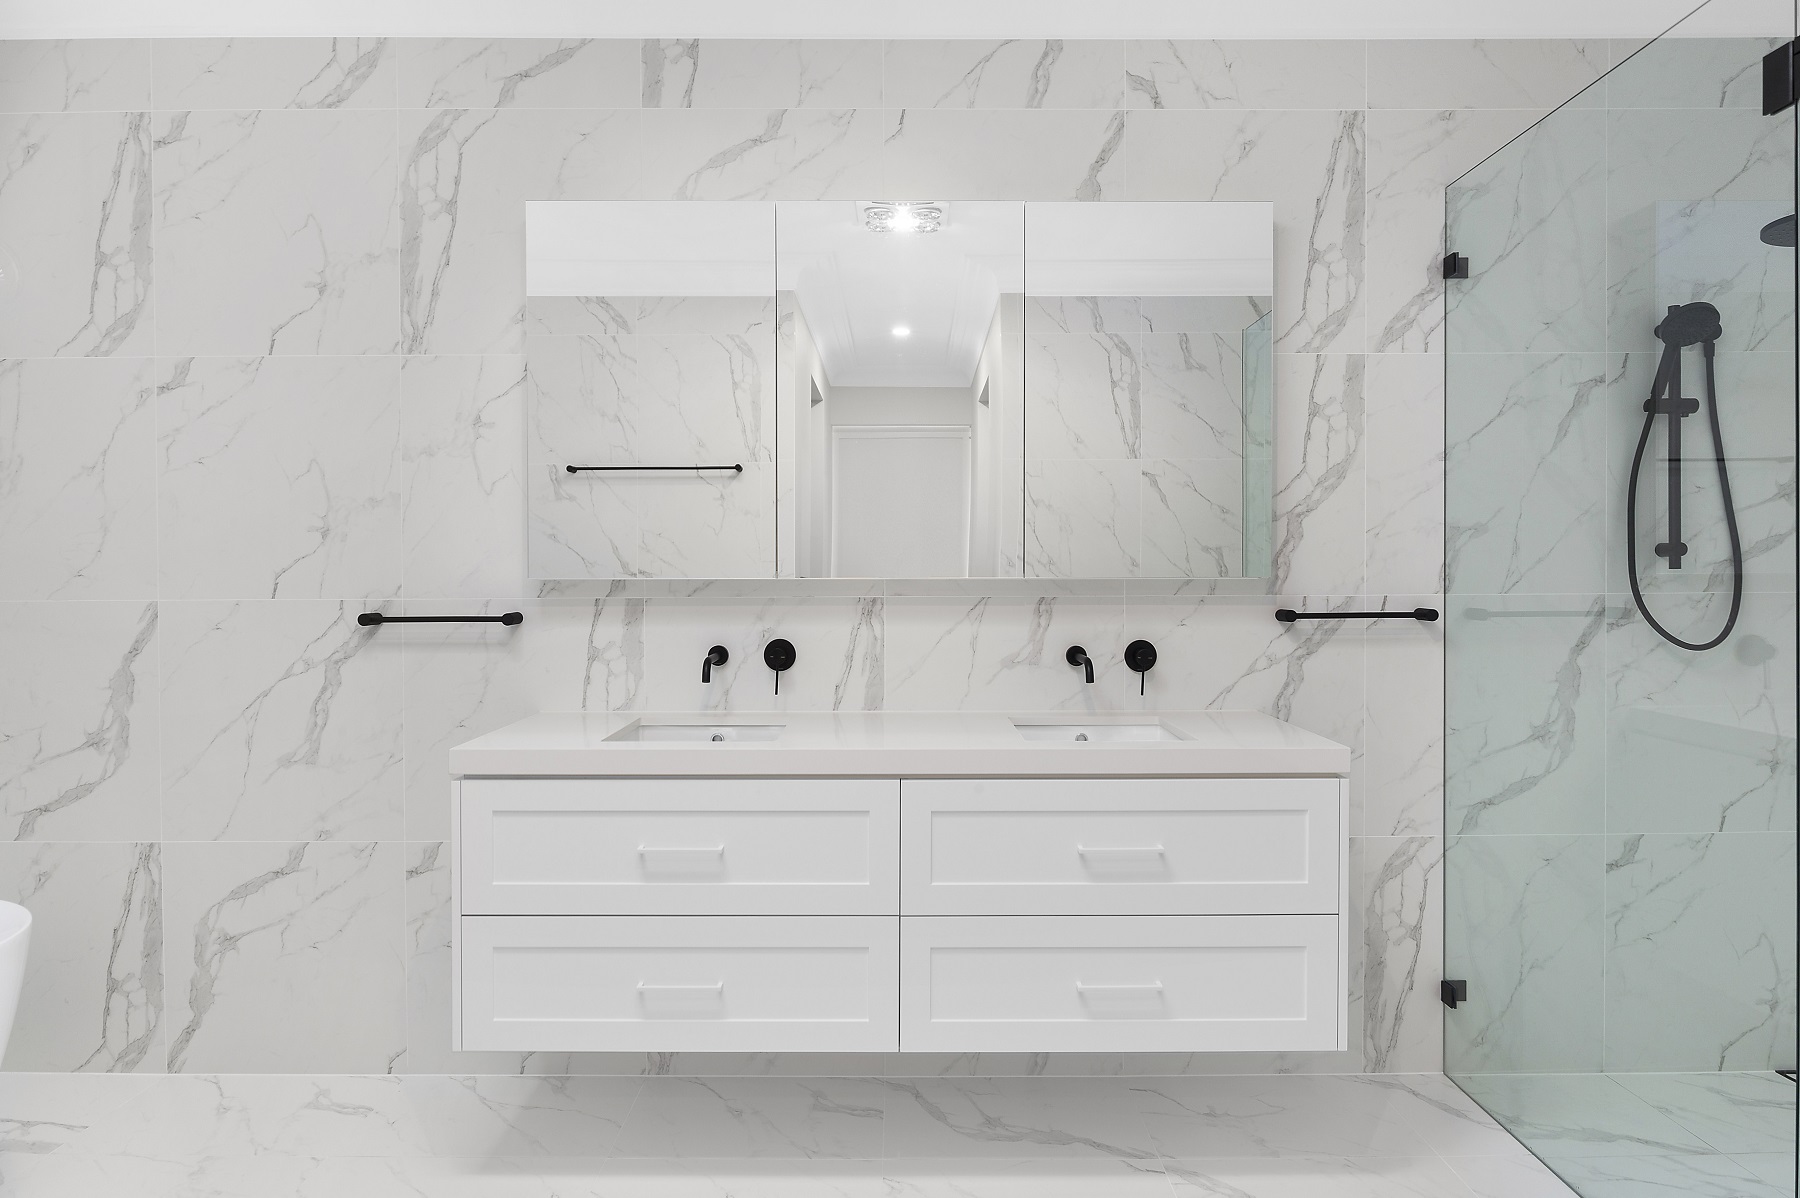 Shaker style double basin vanity with mirror cabinets above - Kellyville, Sydney